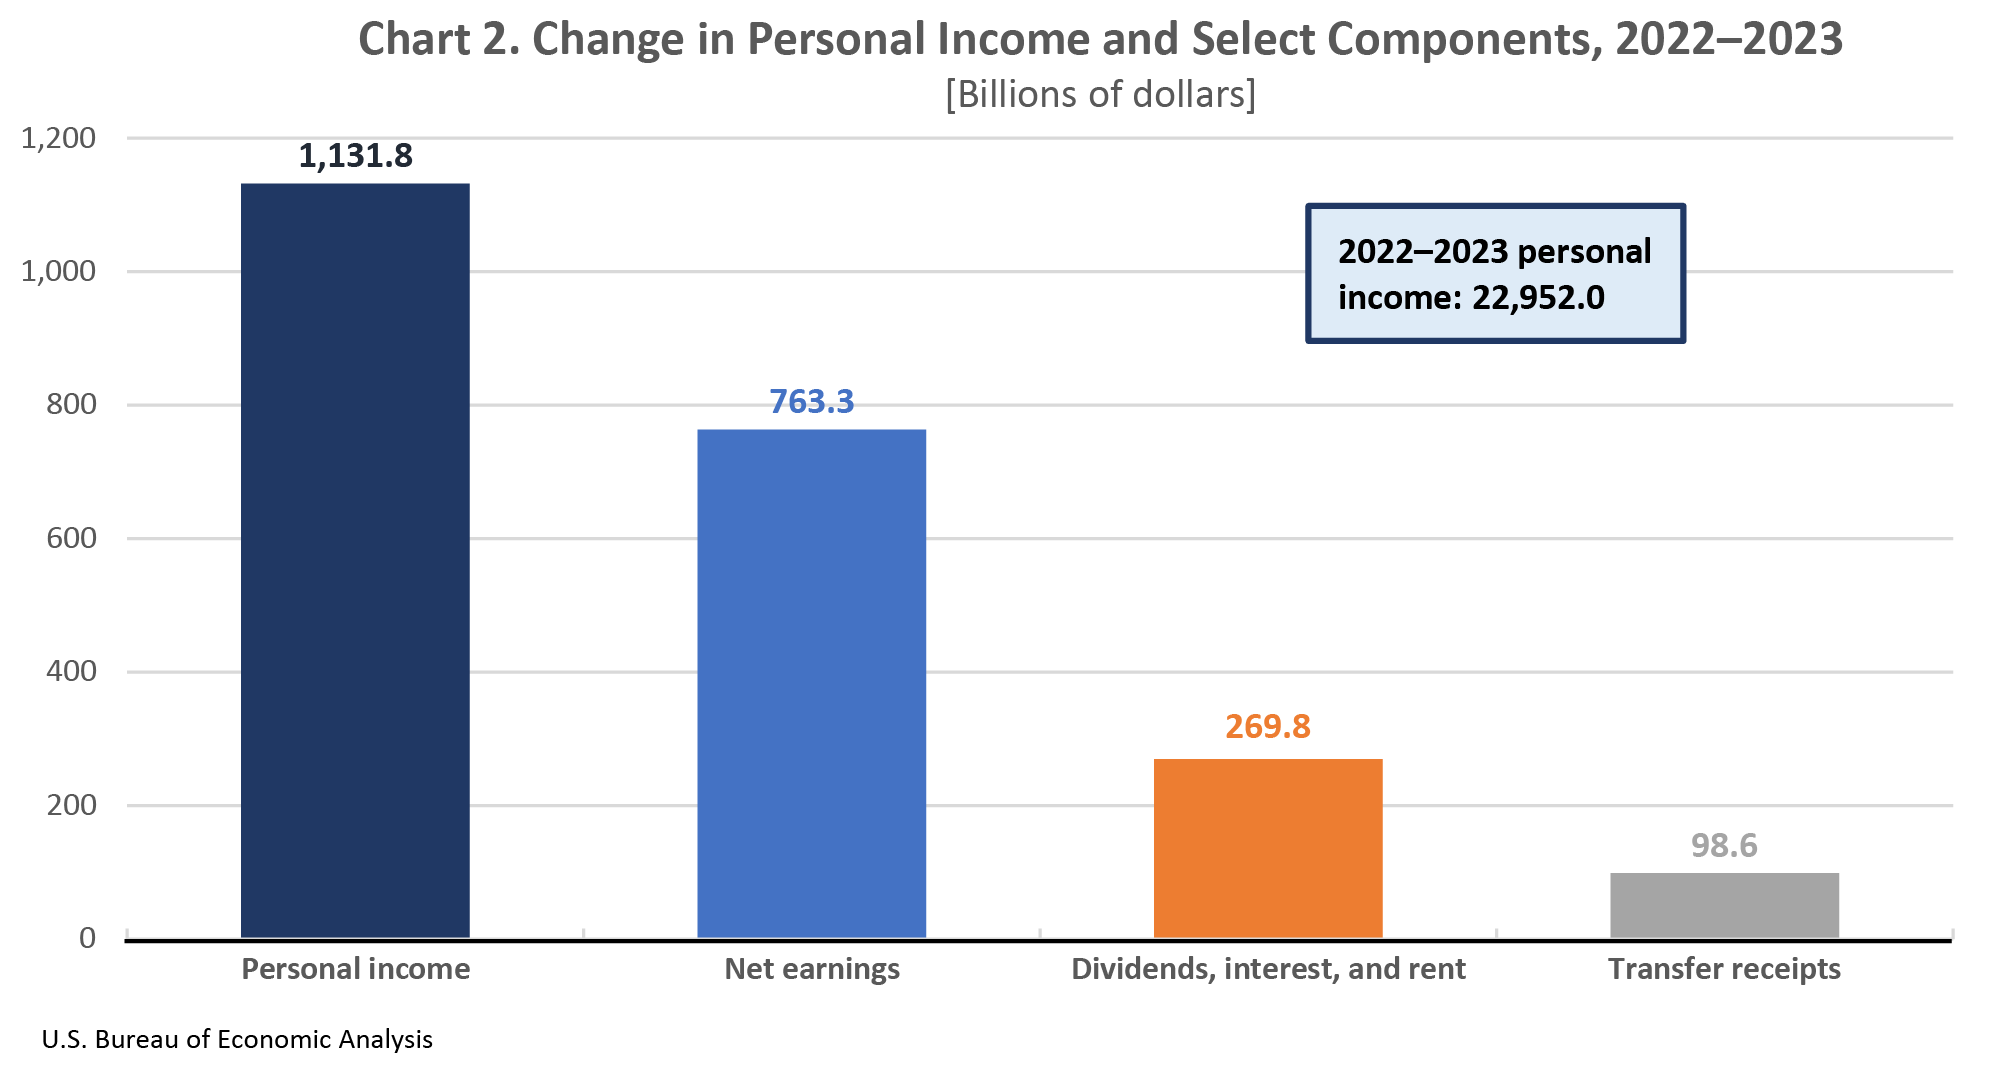 Chart 2. Change in Personal Income and Select Components, United States, 2022-2023